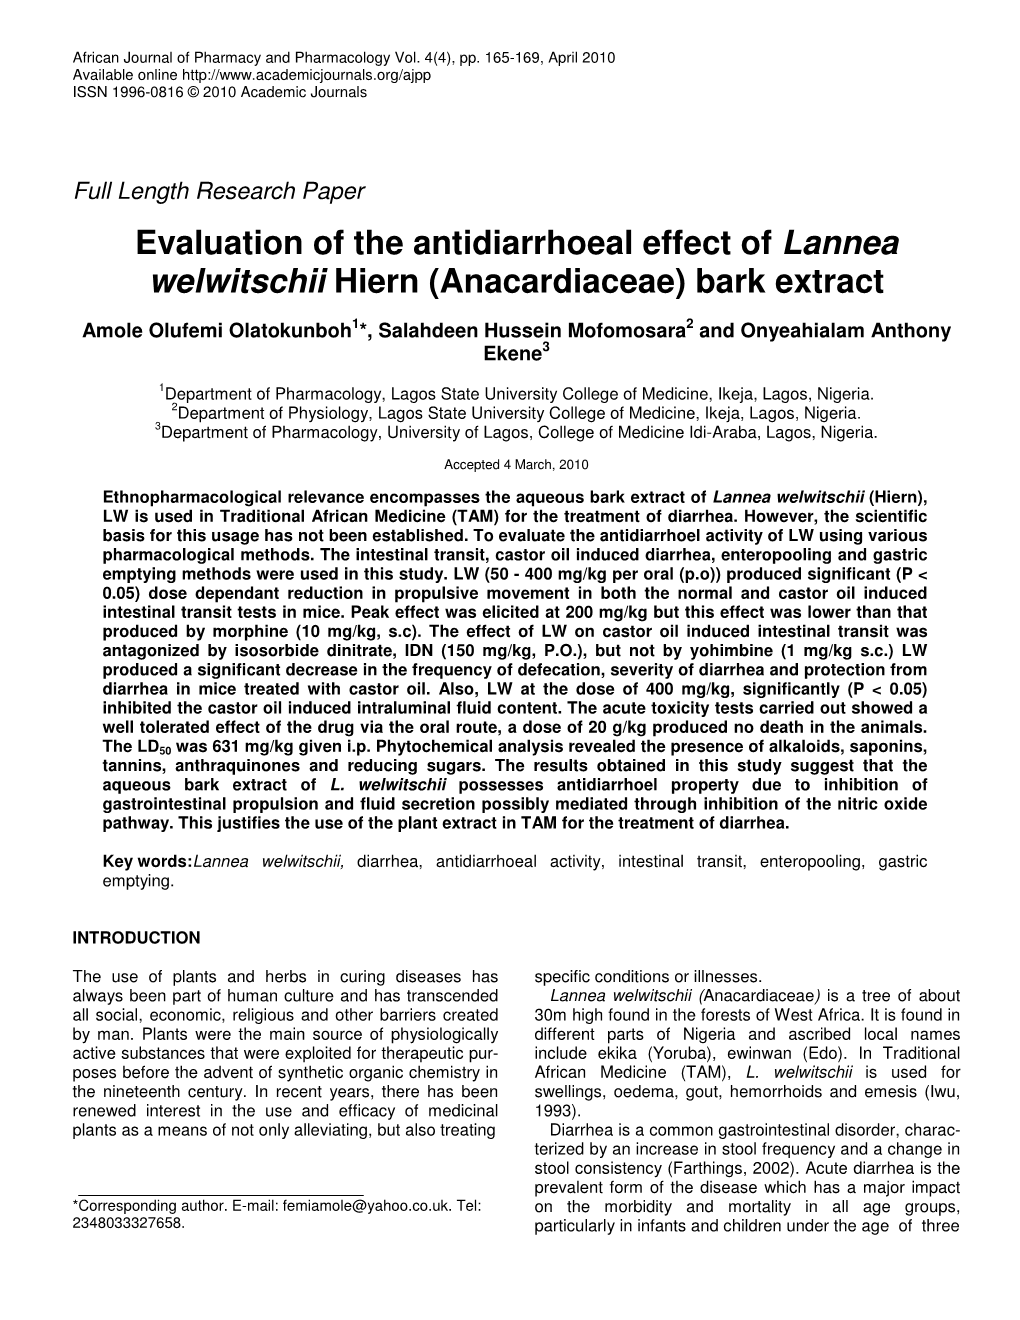 Evaluation of the Antidiarrhoeal Effect of Lannea Welwitschii Hiern (Anacardiaceae) Bark Extract